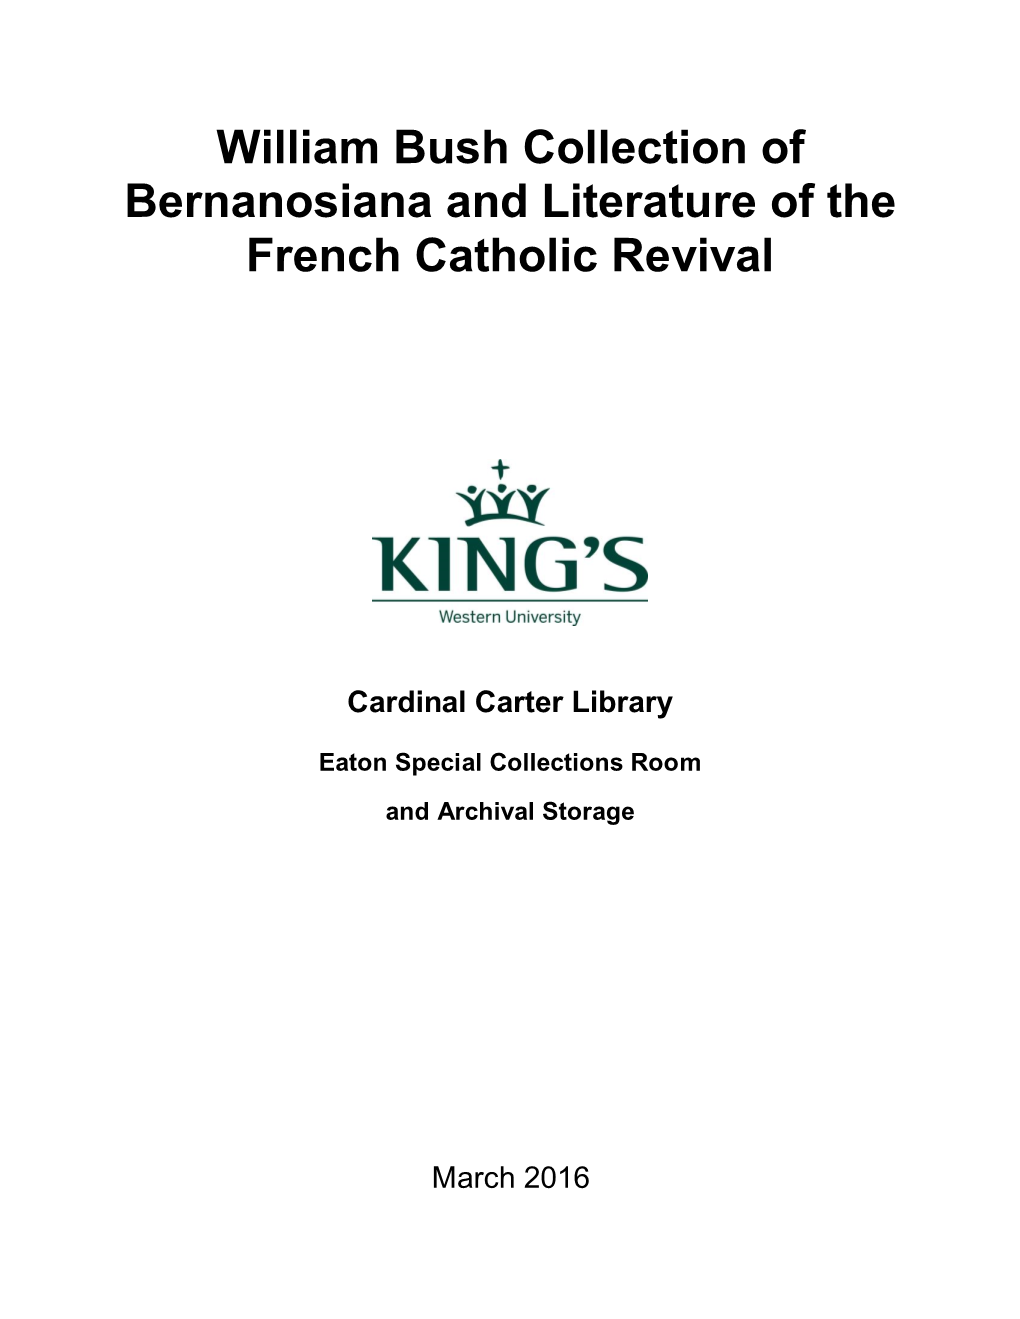 William Bush Collection of Bernanosiana and Literature of the French Catholic Revival